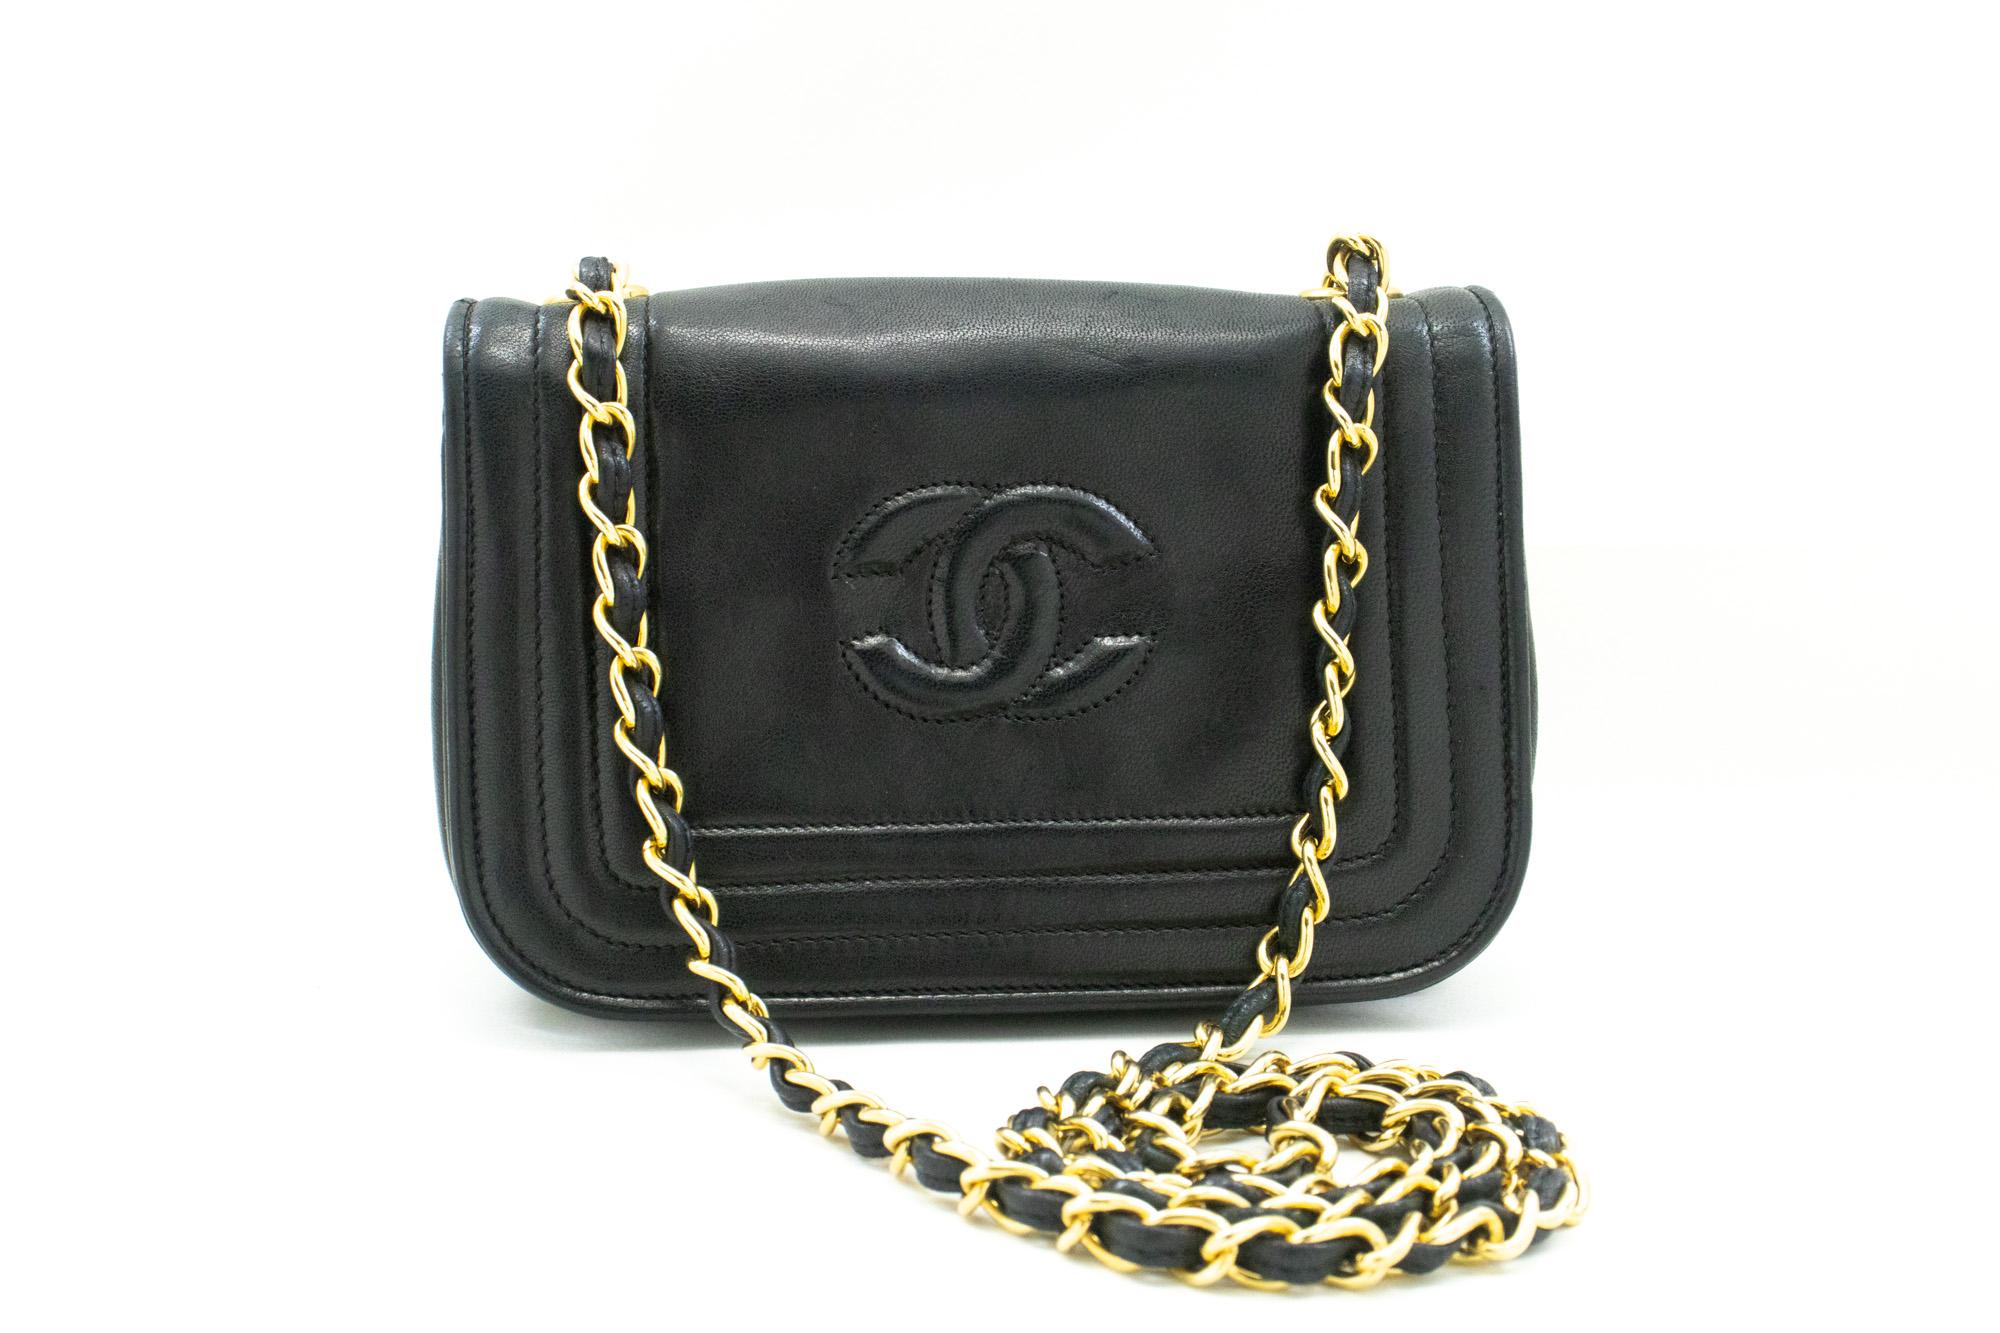 An authentic CHANEL Full Flap Mini Small Chain Shoulder Bag Black Coco Quilted. The color is Black. The outside material is Leather. The pattern is Solid. This item is Vintage / Classic. The year of manufacture would be 1986-1988.
Conditions &